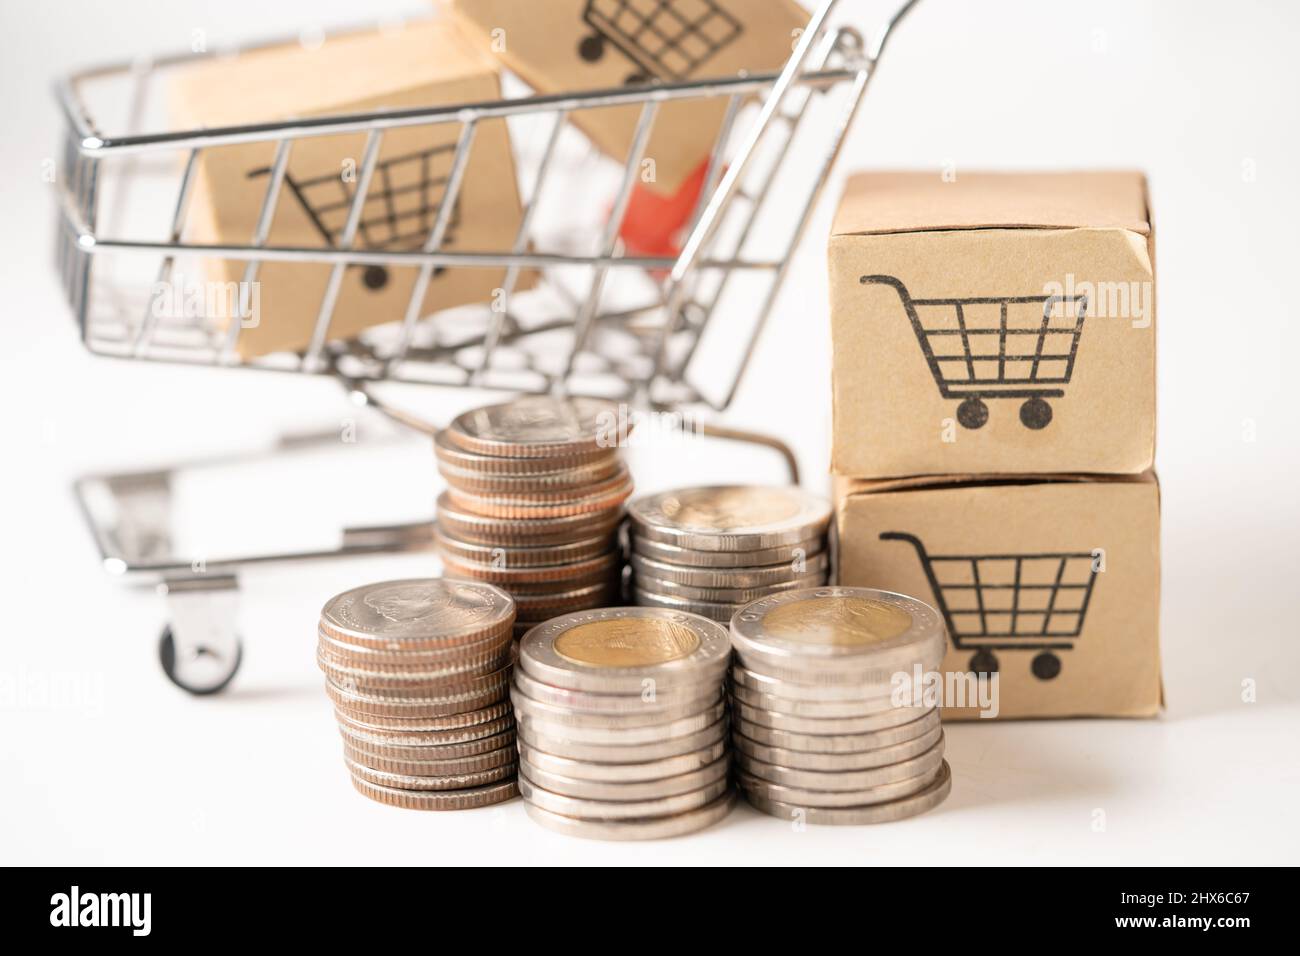 Shopping cart logo on box with coins. Banking Account, Investment Analytic research data economy, trading, Business import export online company conce Stock Photo